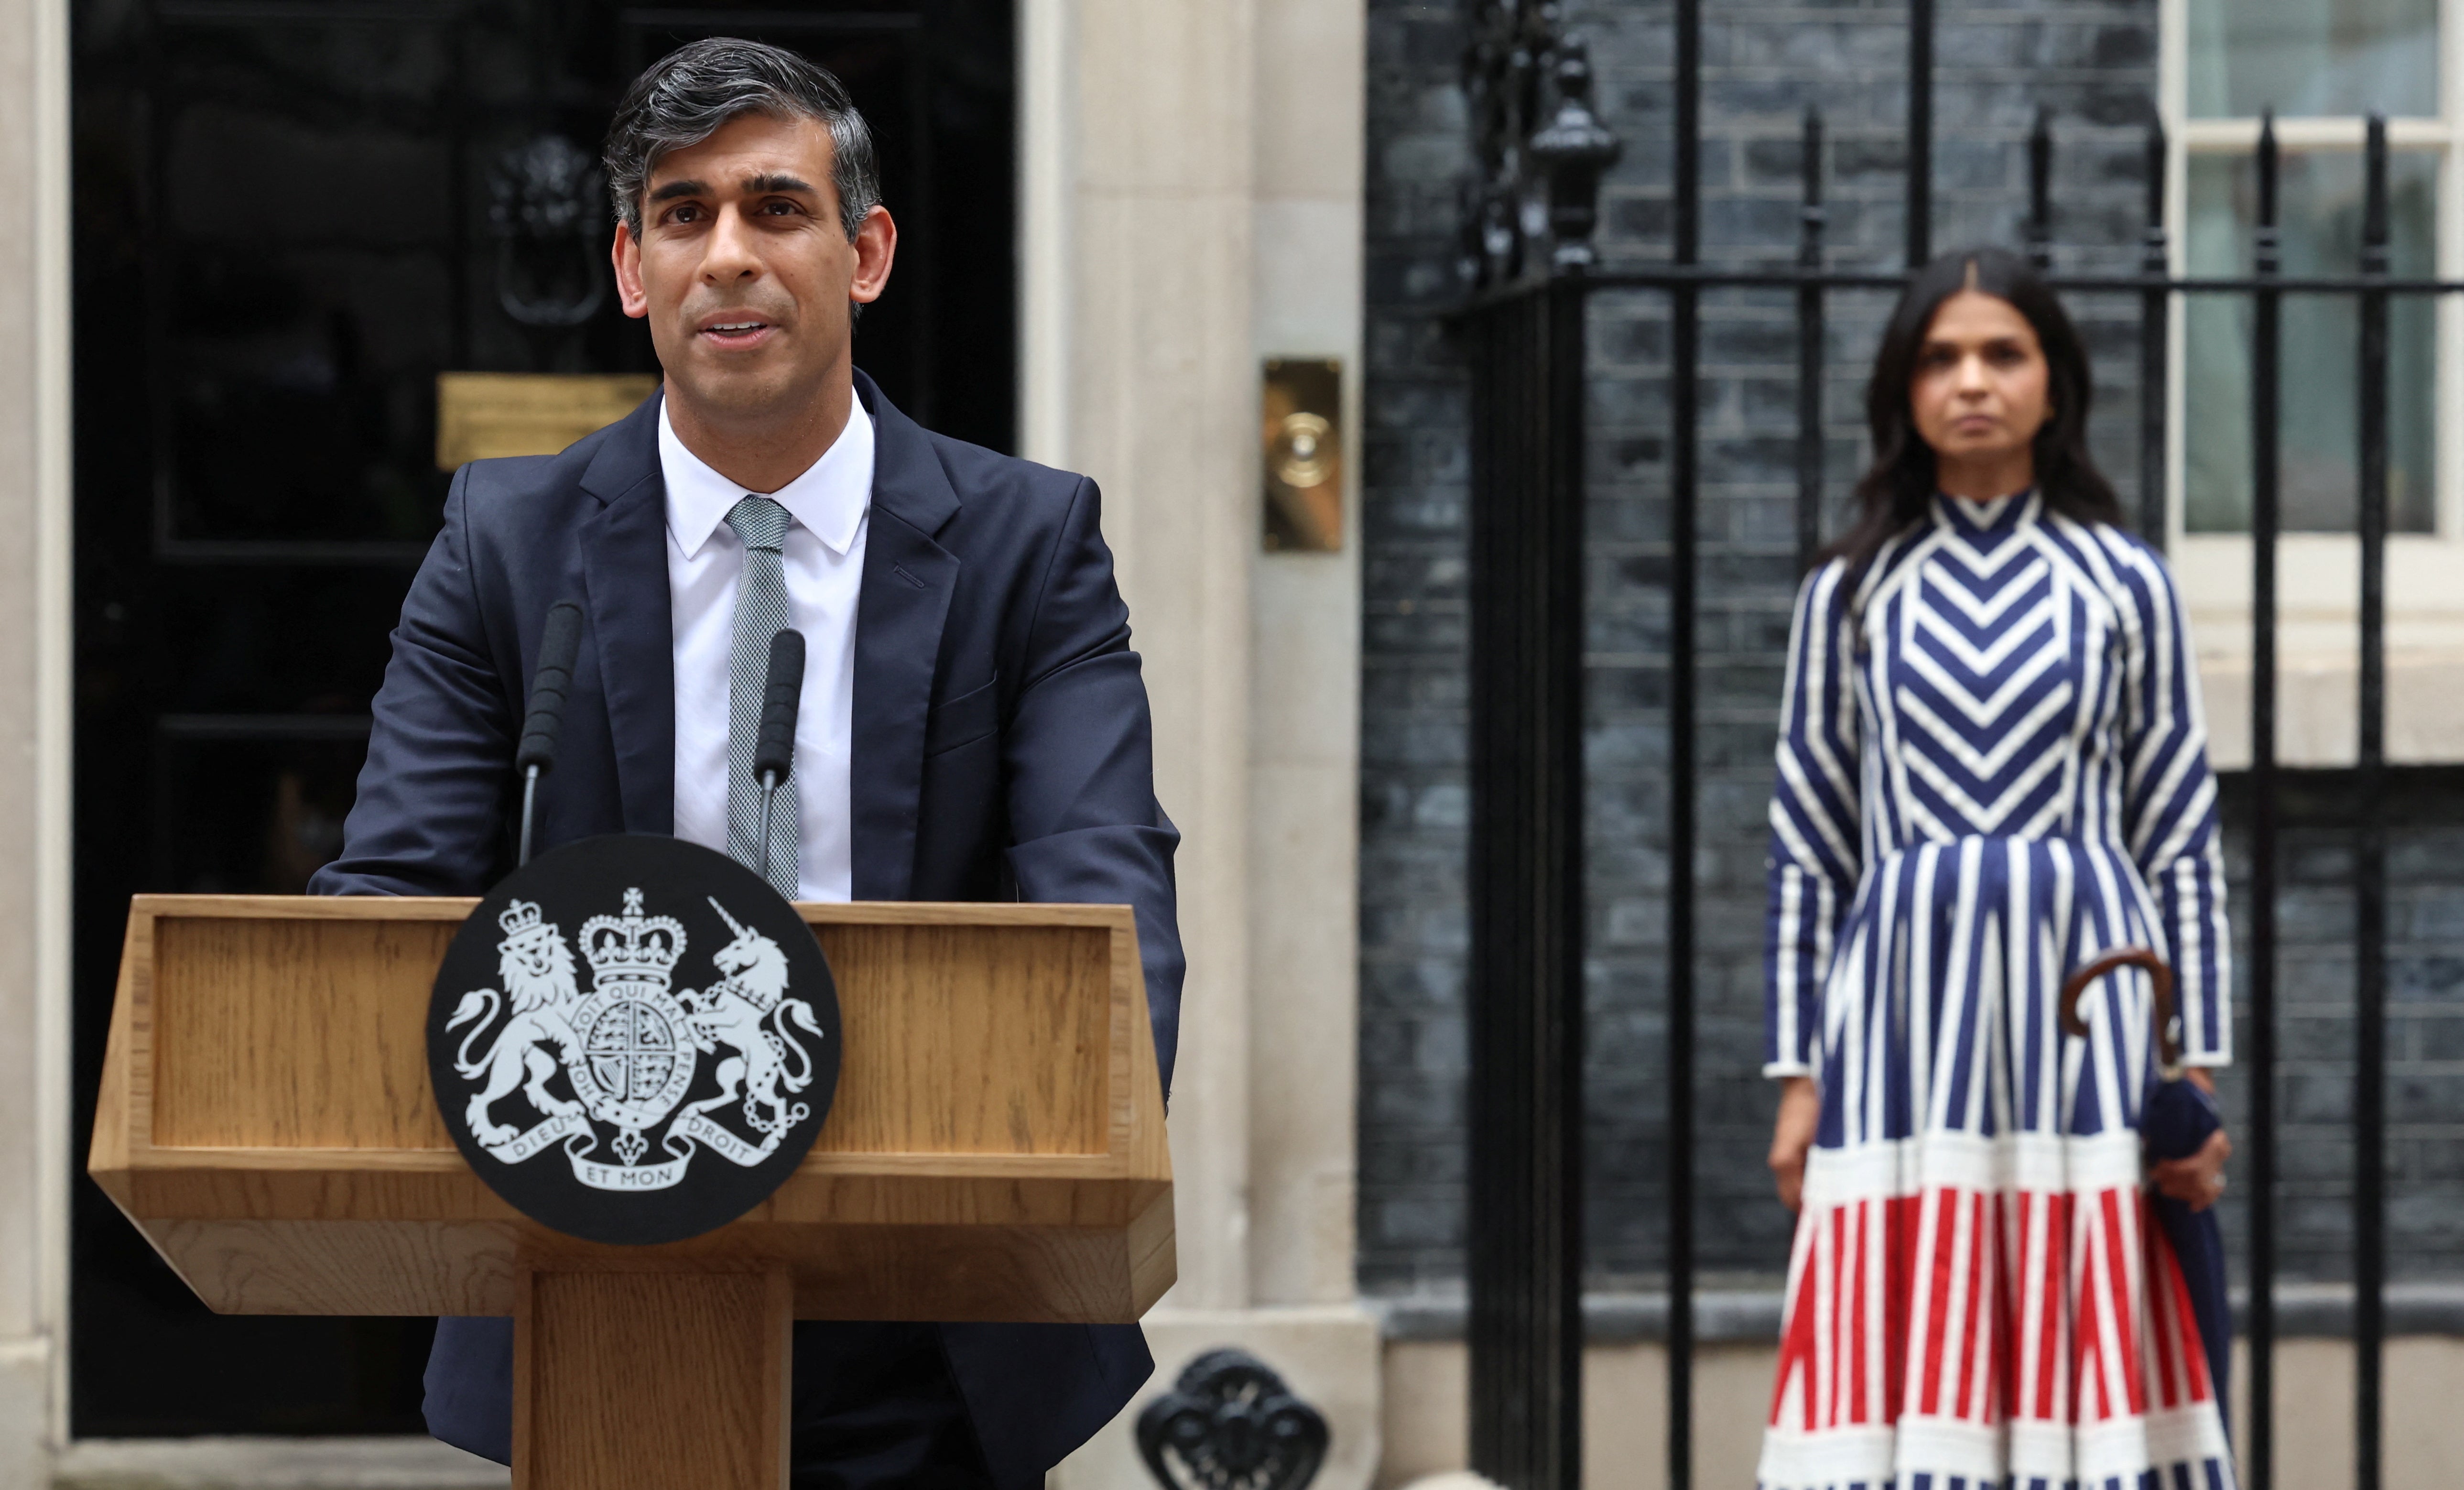 Outgoing British Prime Minister Rishi Sunak, flanked by his wife Akshata Murty, delivers a speech at Number 10 Downing Street